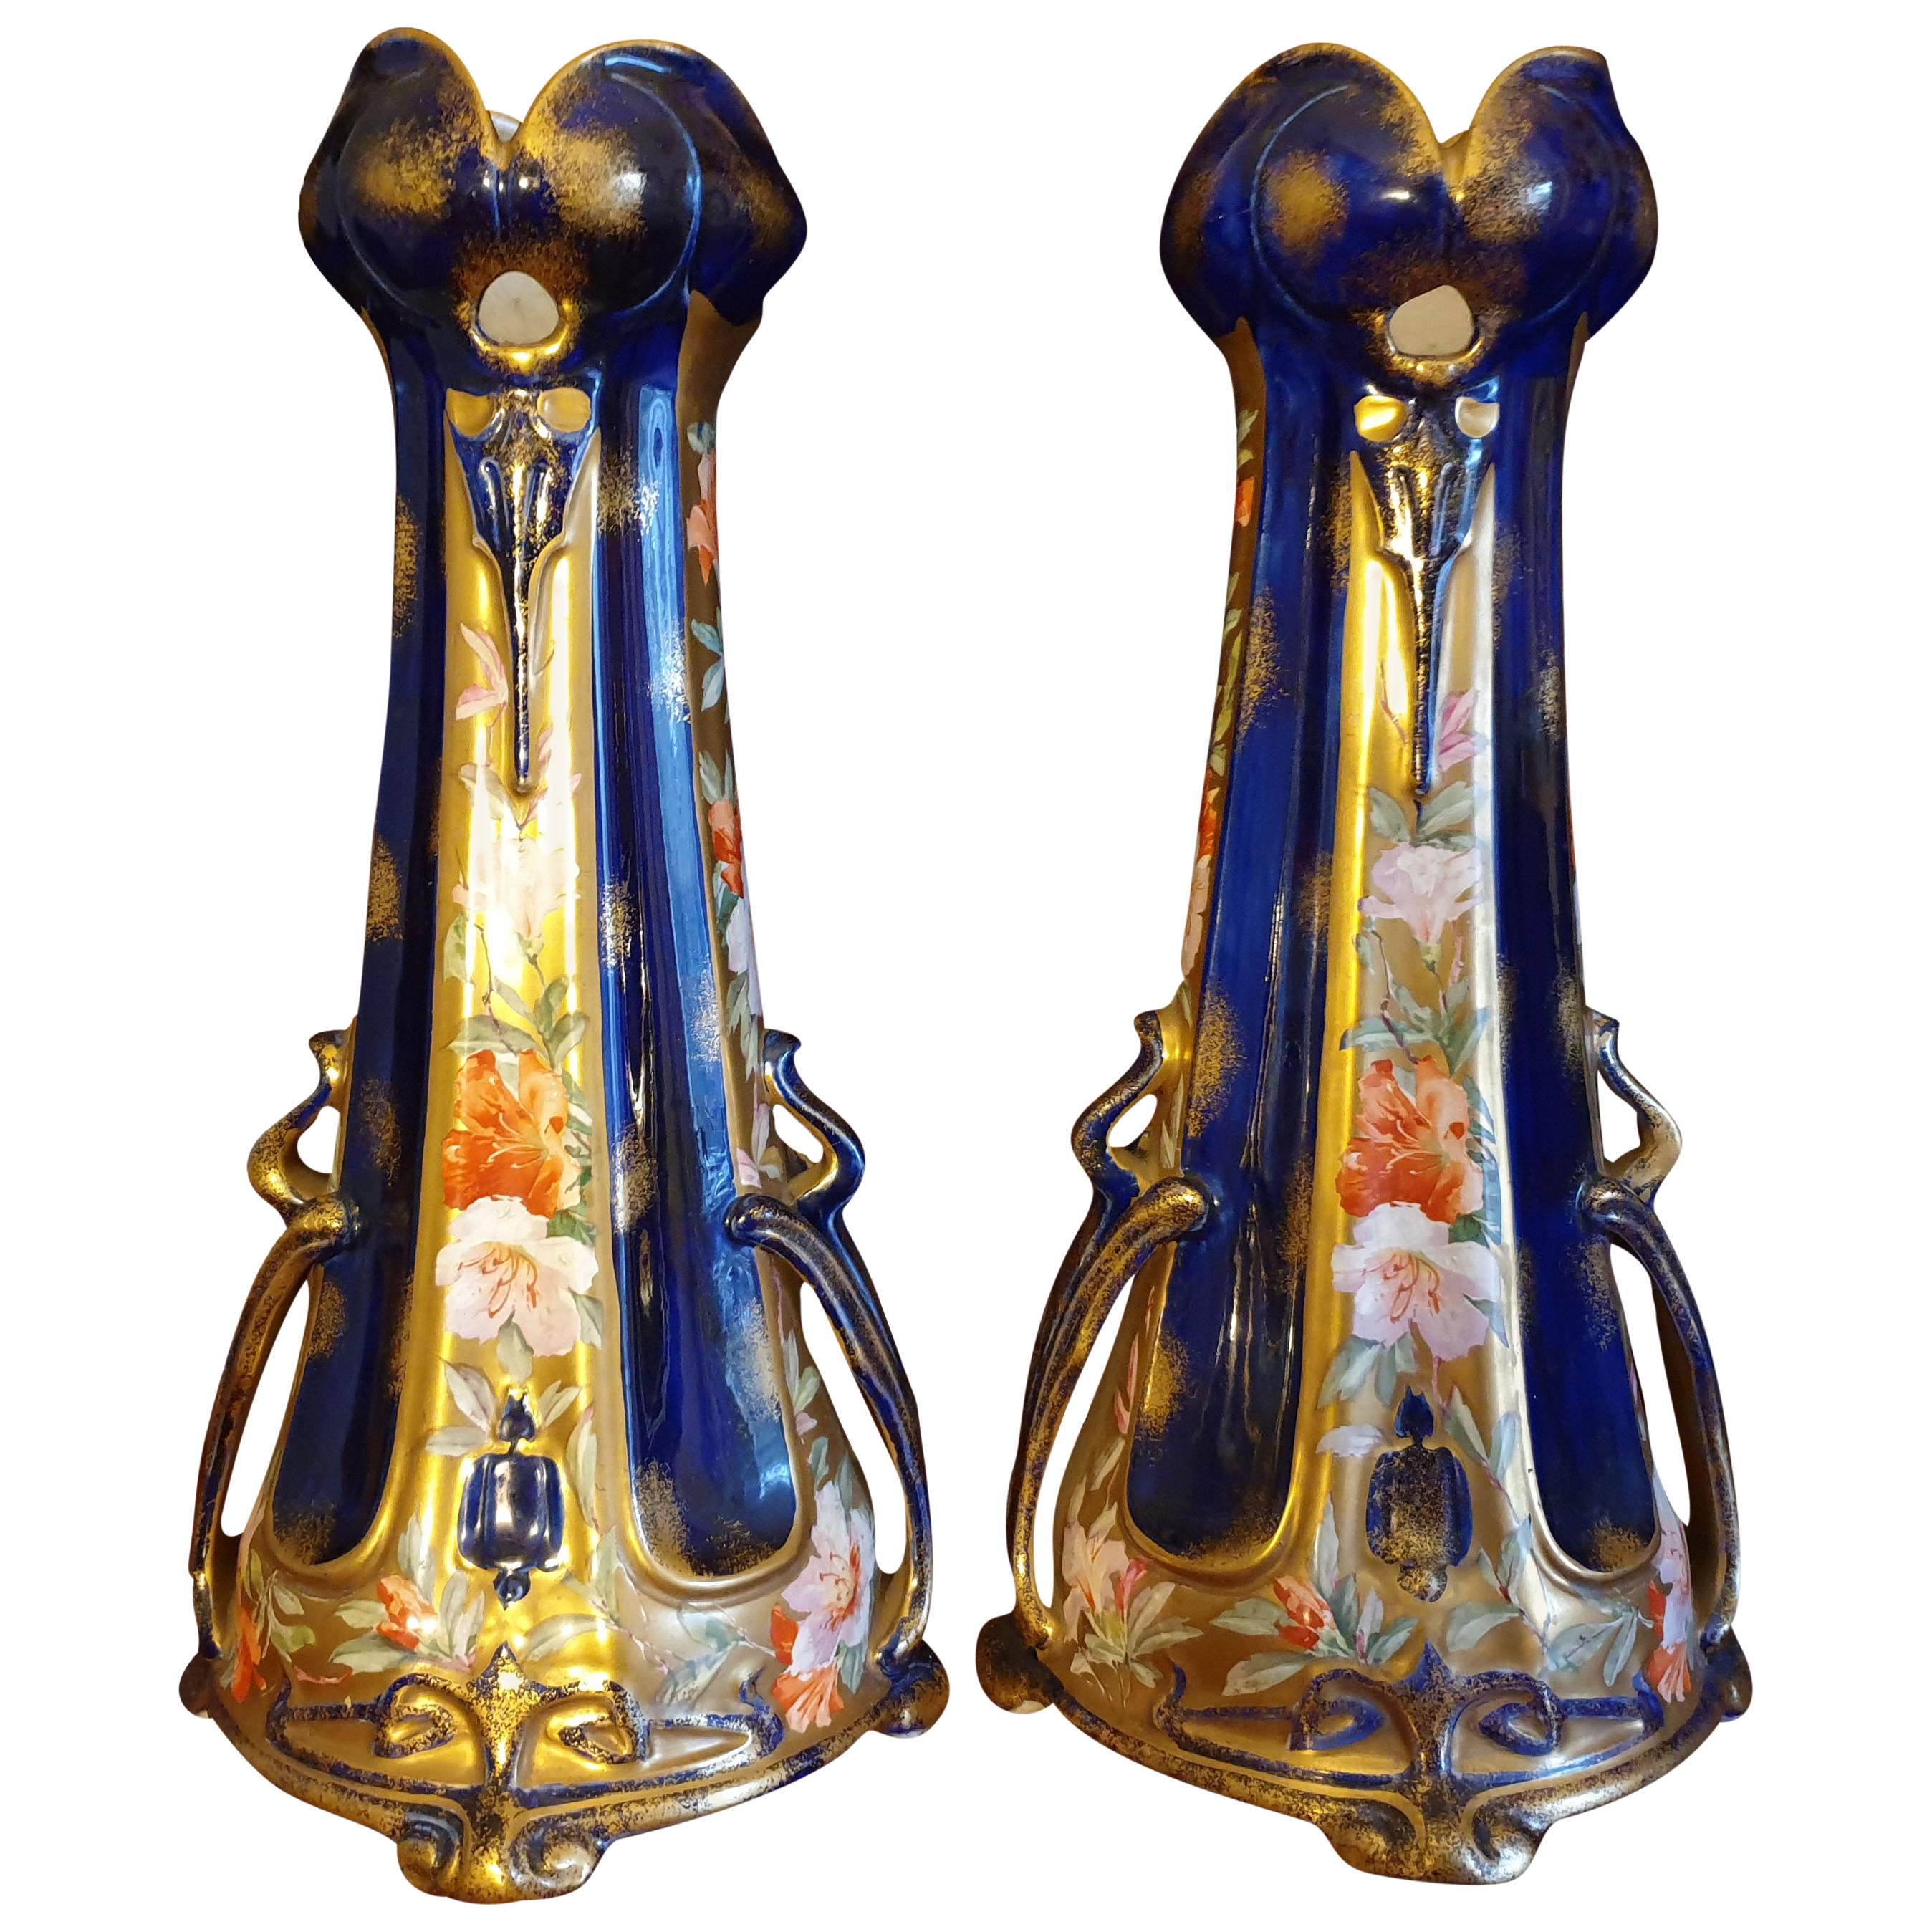 English Art Nouveau 19th Century Hand Painted Floral Pierced Gilded Vases  For Sale